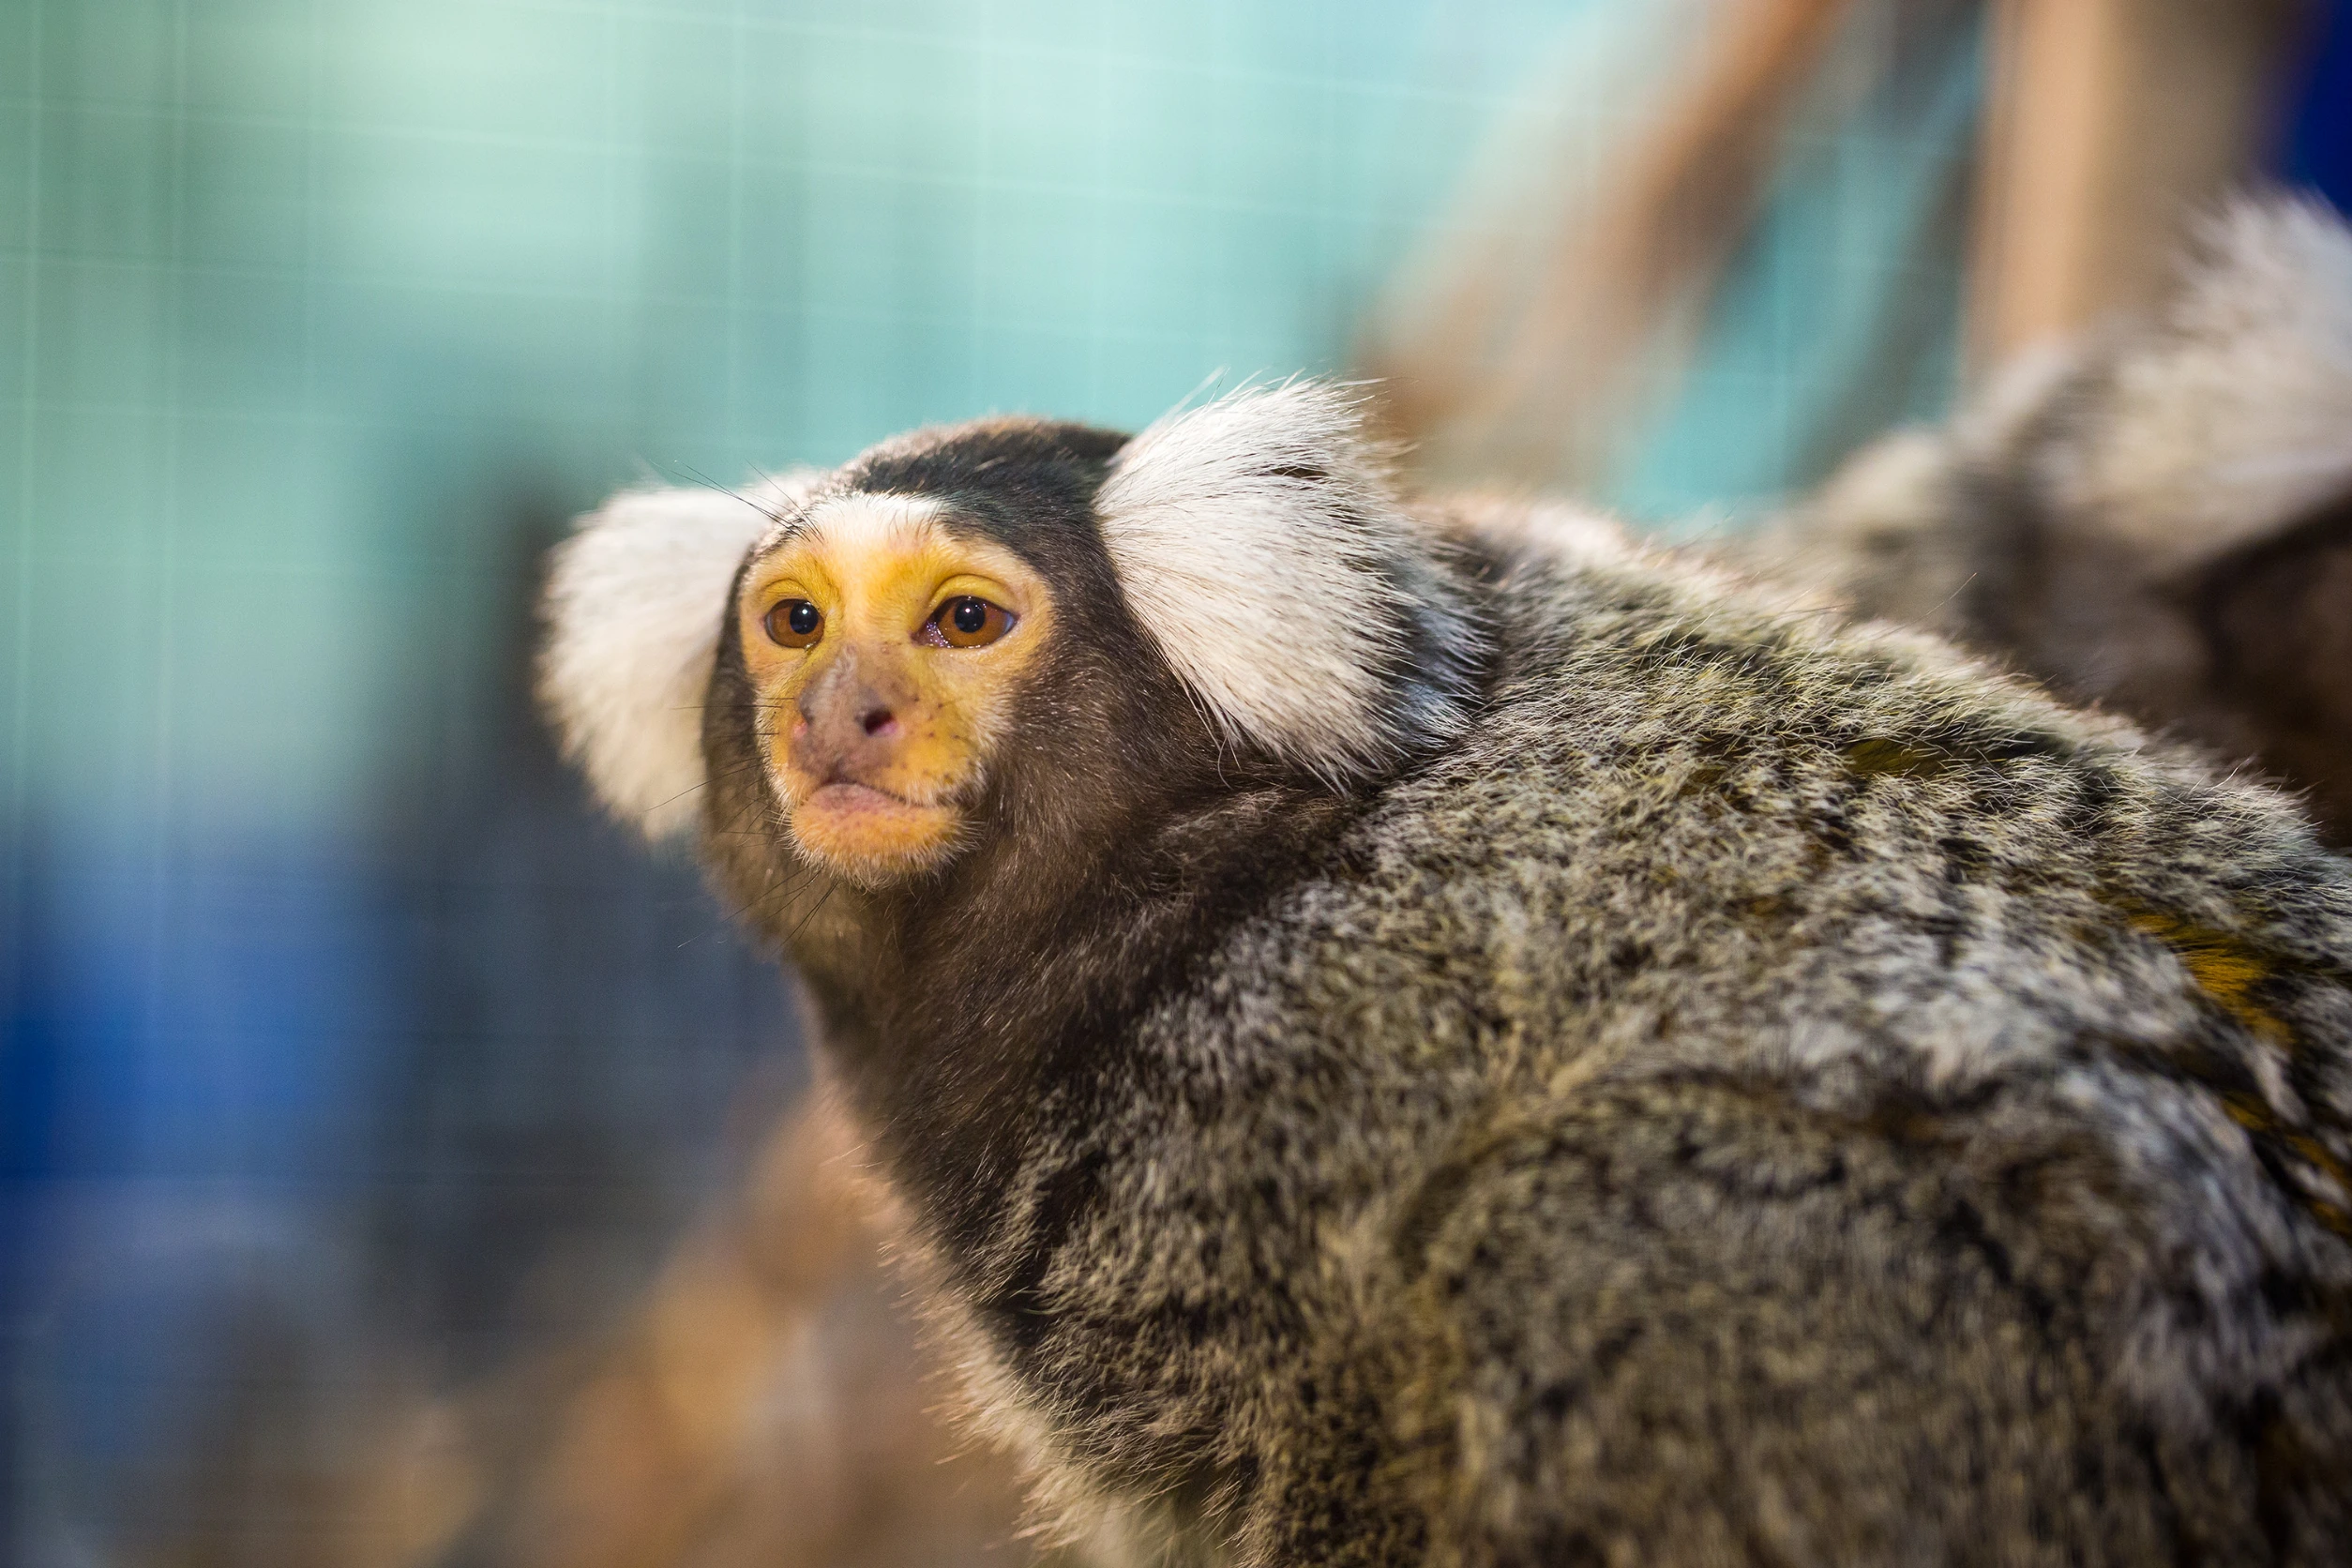 <p>Marmosets are fascinating primates that can be suitable for apartment living under the right circumstances. These small monkeys are highly intelligent and social animals, requiring plenty of mental stimulation and interaction with their human caregivers.</p> <p>While they may need more space and specialized care compared to some other pets on this list, dedicated owners can provide enriching environments for marmosets in smaller living spaces, fostering a unique bond and companionship experience.</p>